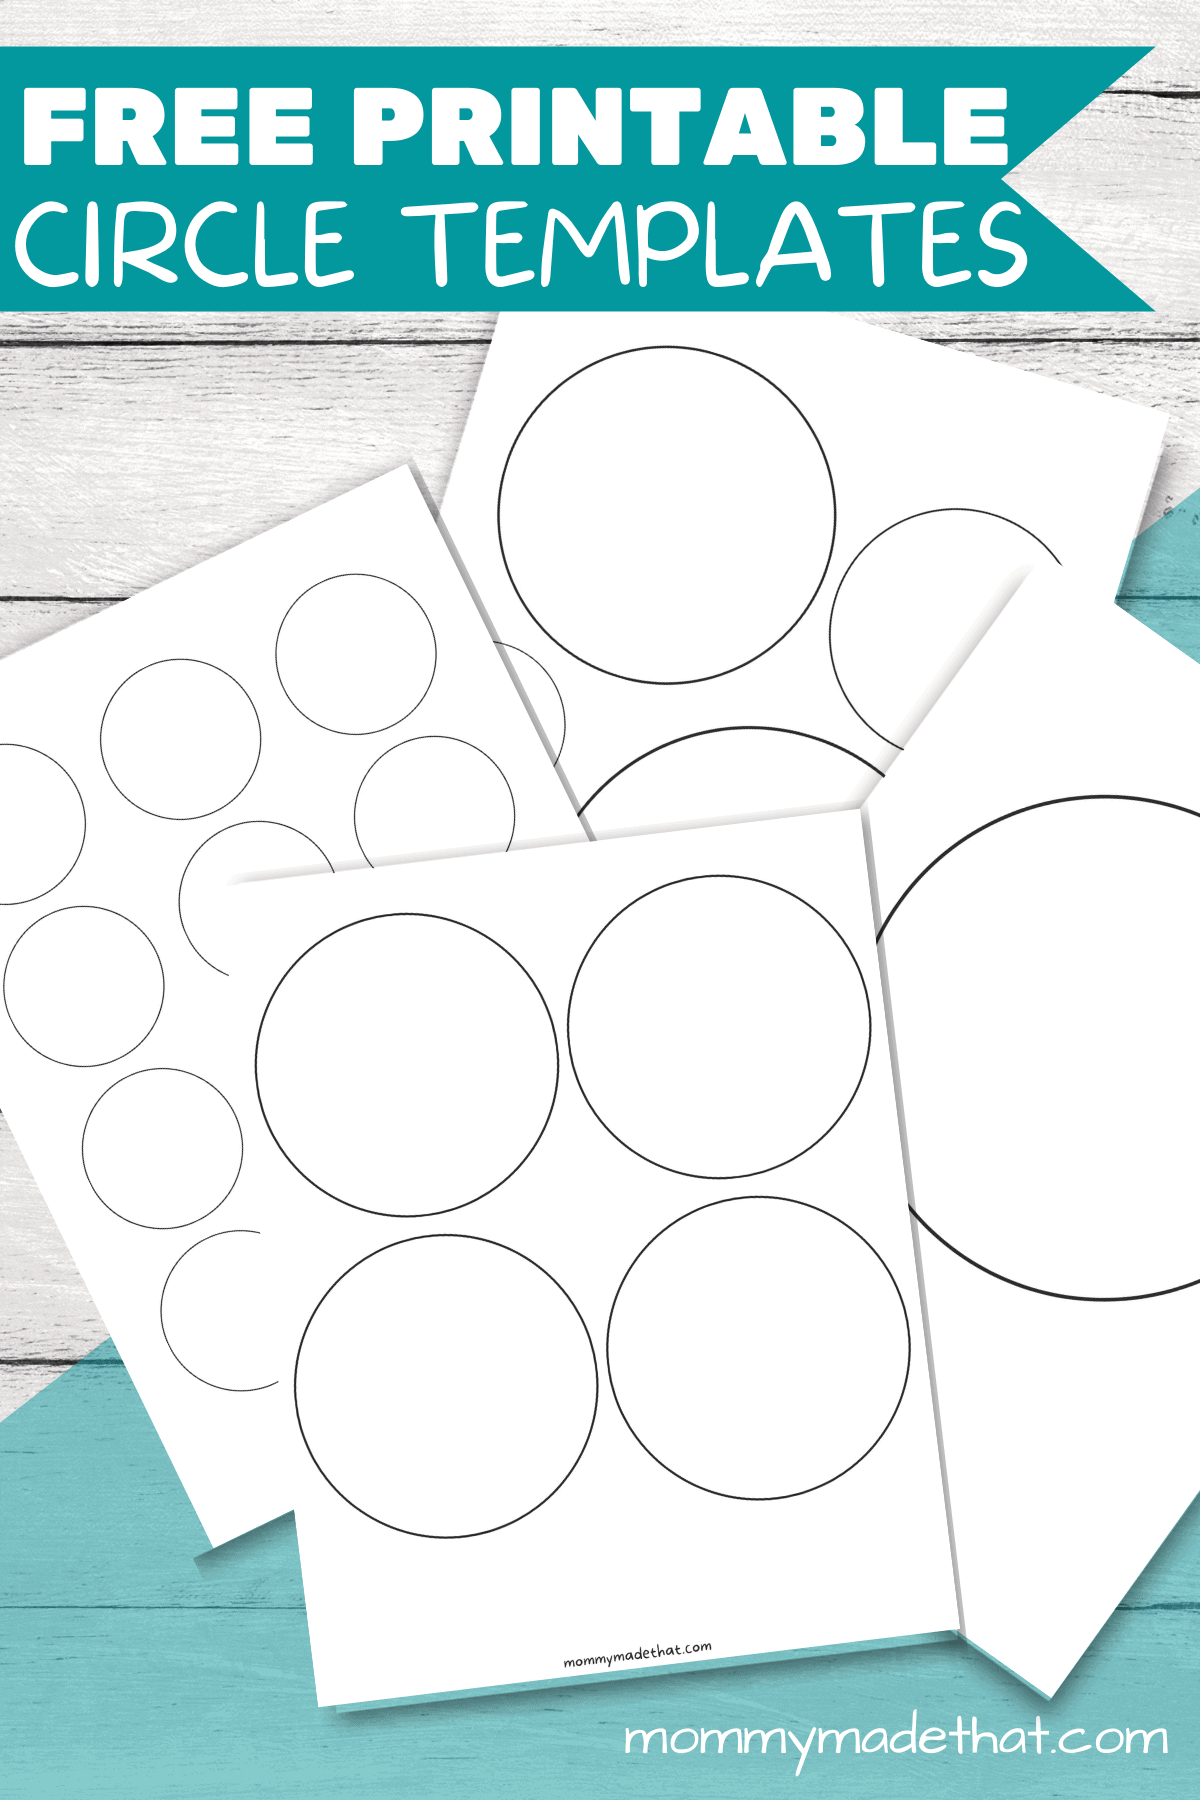 Free Printable Circle Templates In All Sorts Of Sizes - Free Printable 6 Inch Circle Template